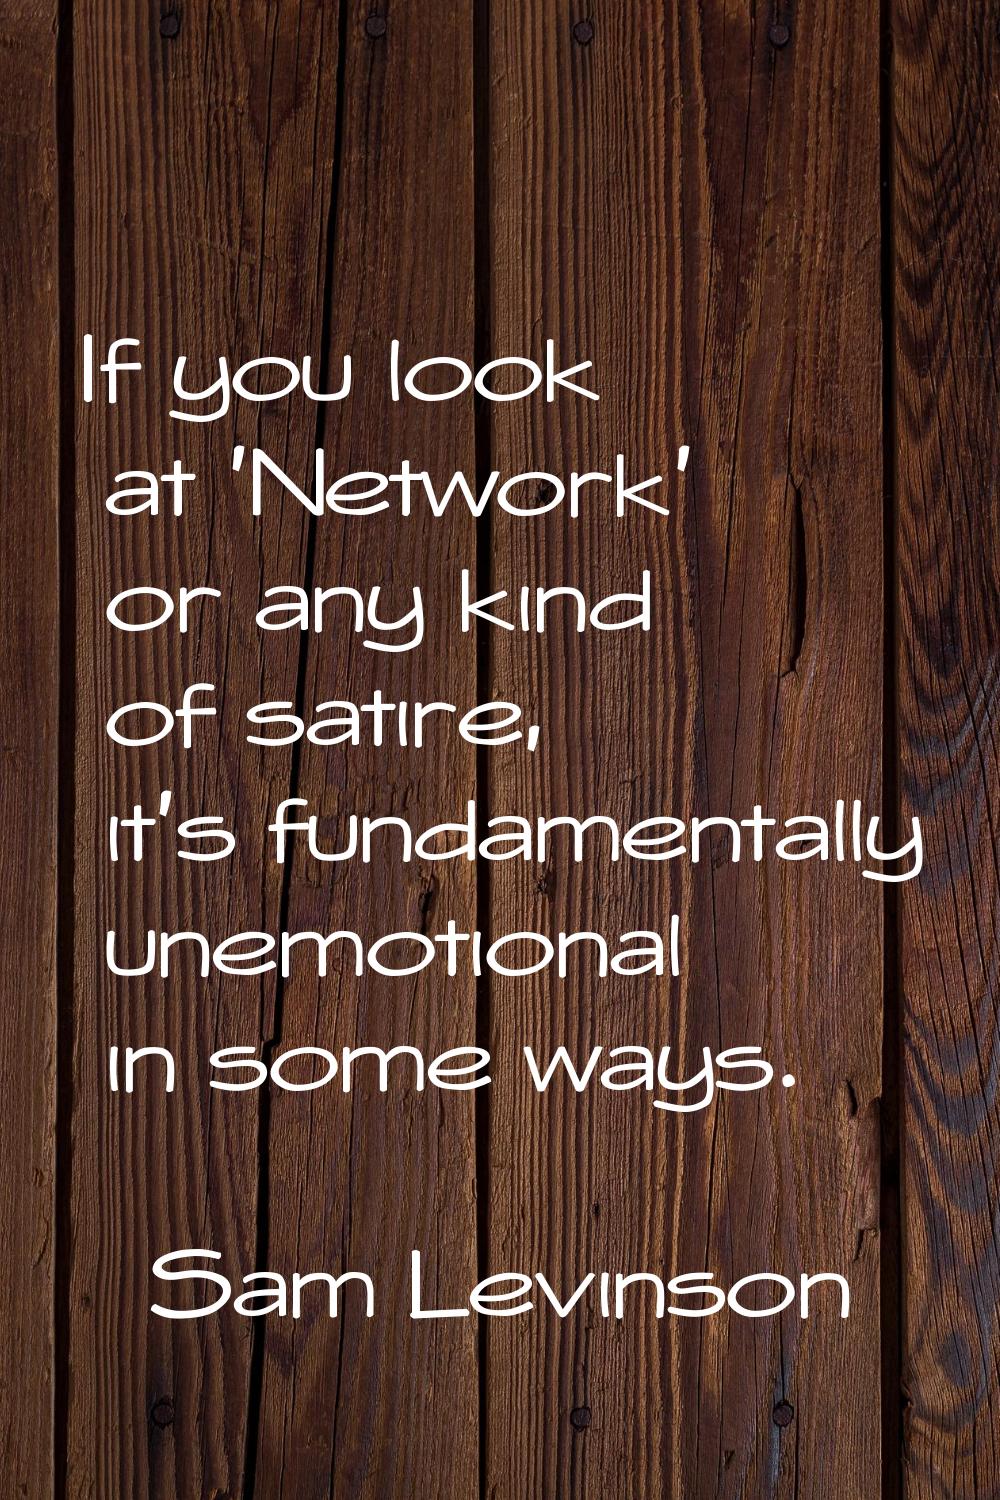 If you look at 'Network' or any kind of satire, it’s fundamentally unemotional in some ways.